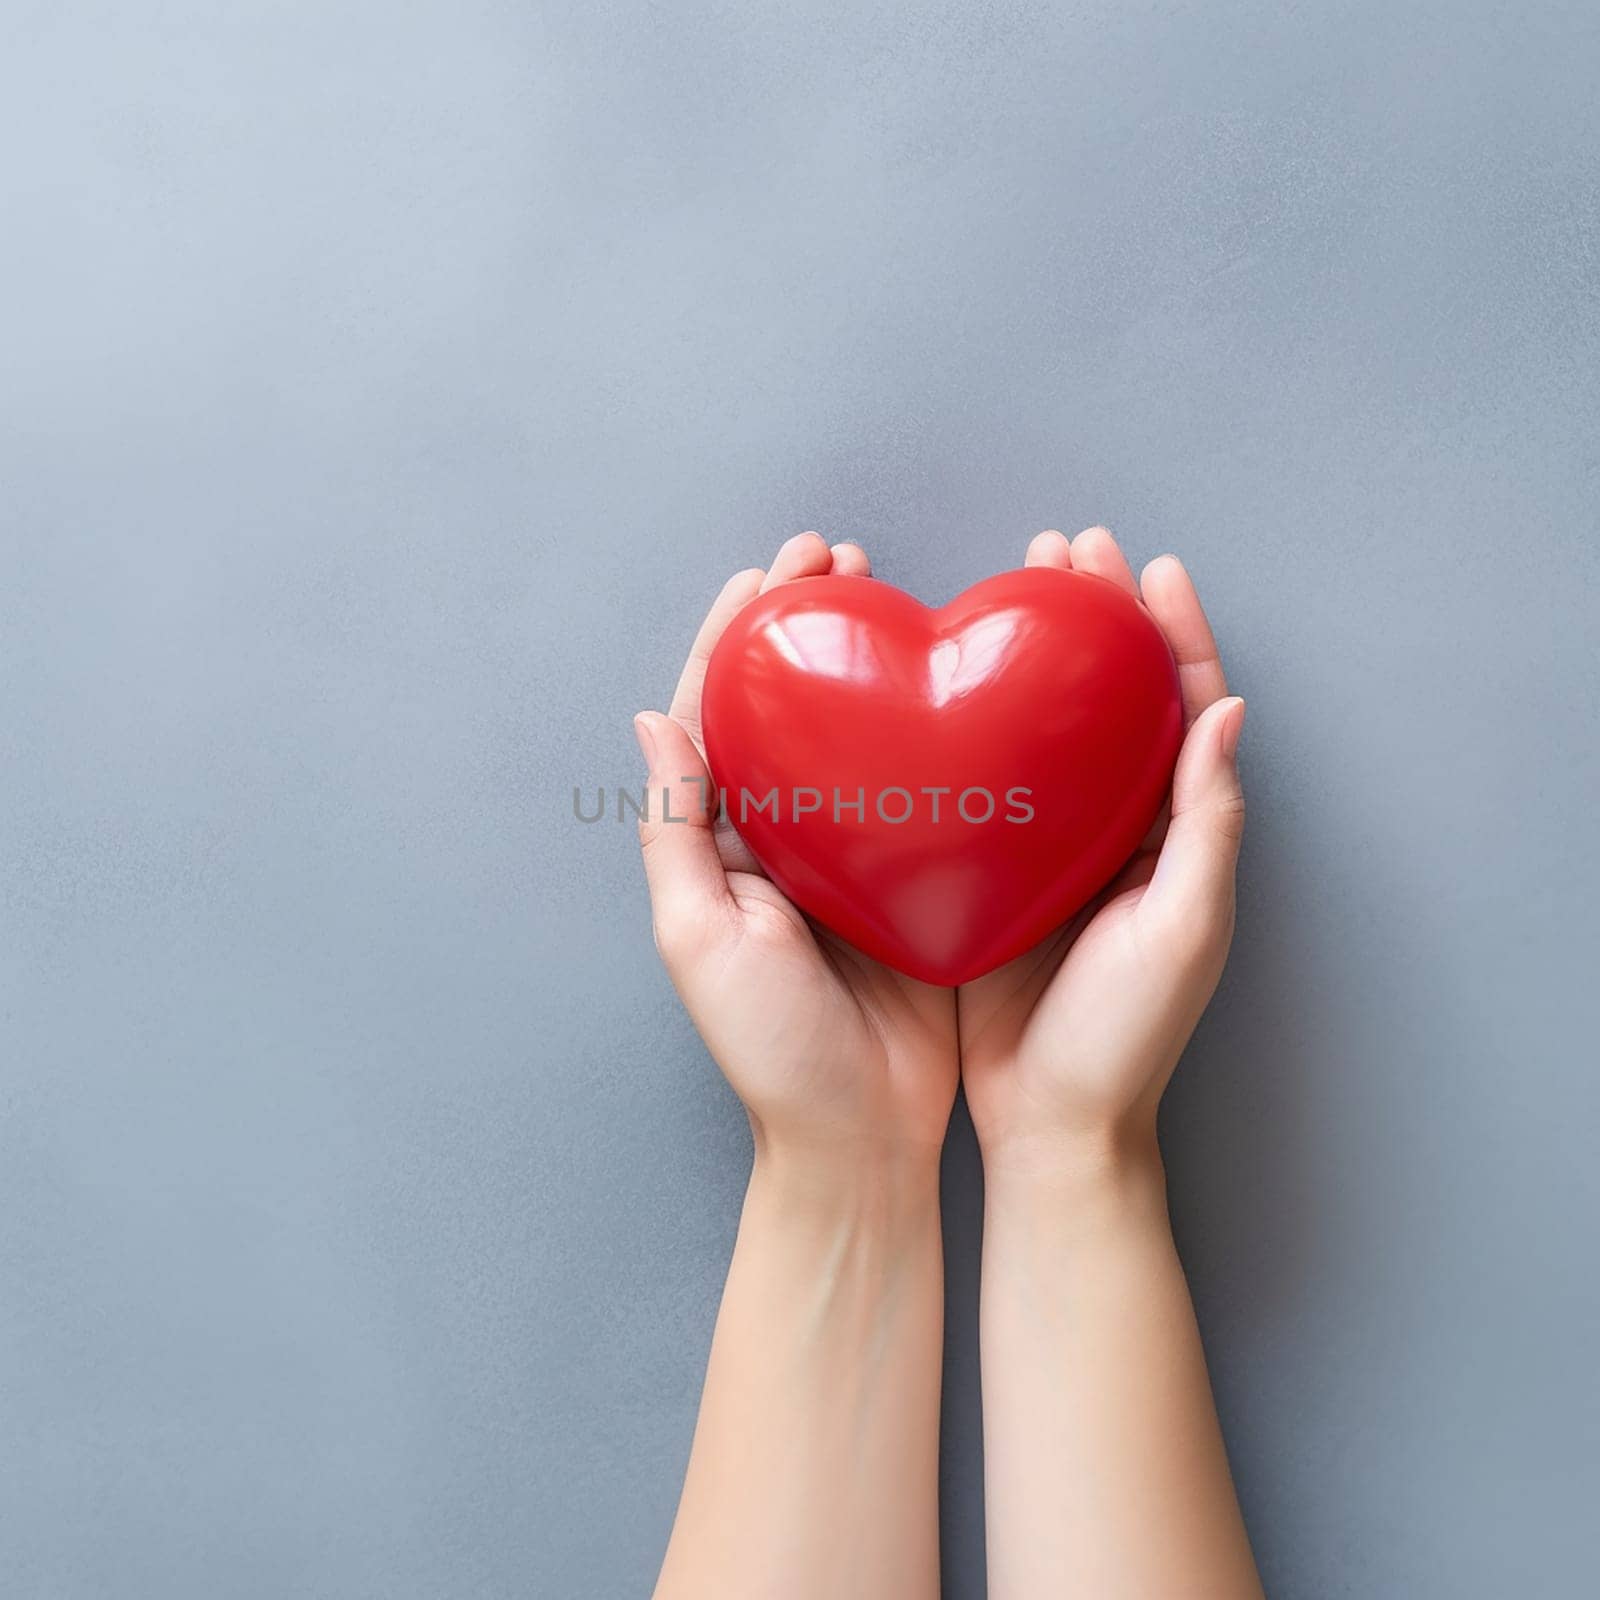 Two hands cradling a red heart against a grey background.